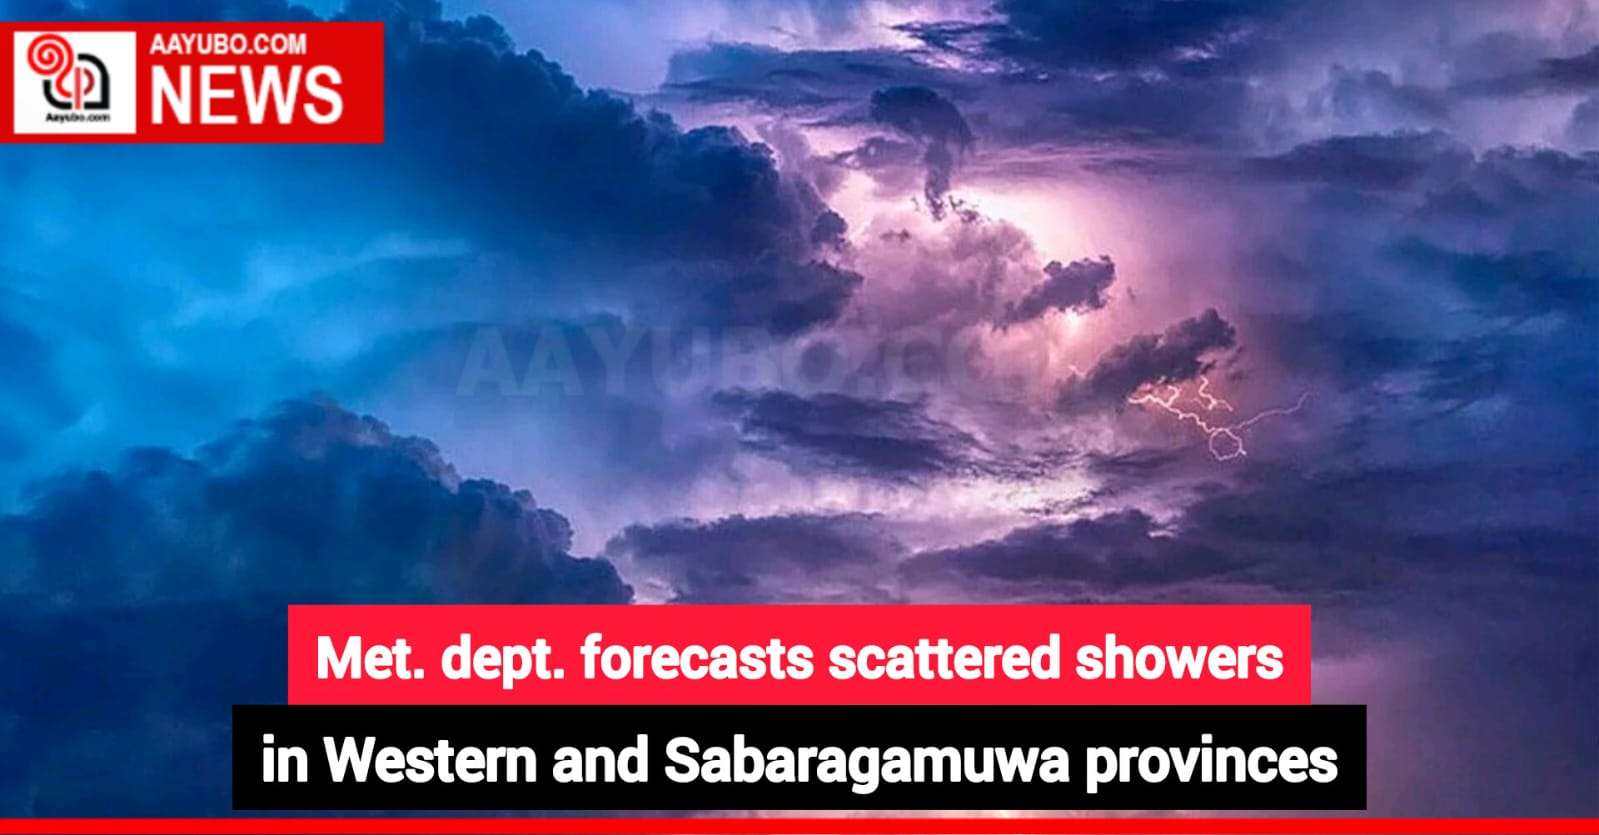 Met. dept. forecasts scattered showers in Western and Sabaragamuwa provinces